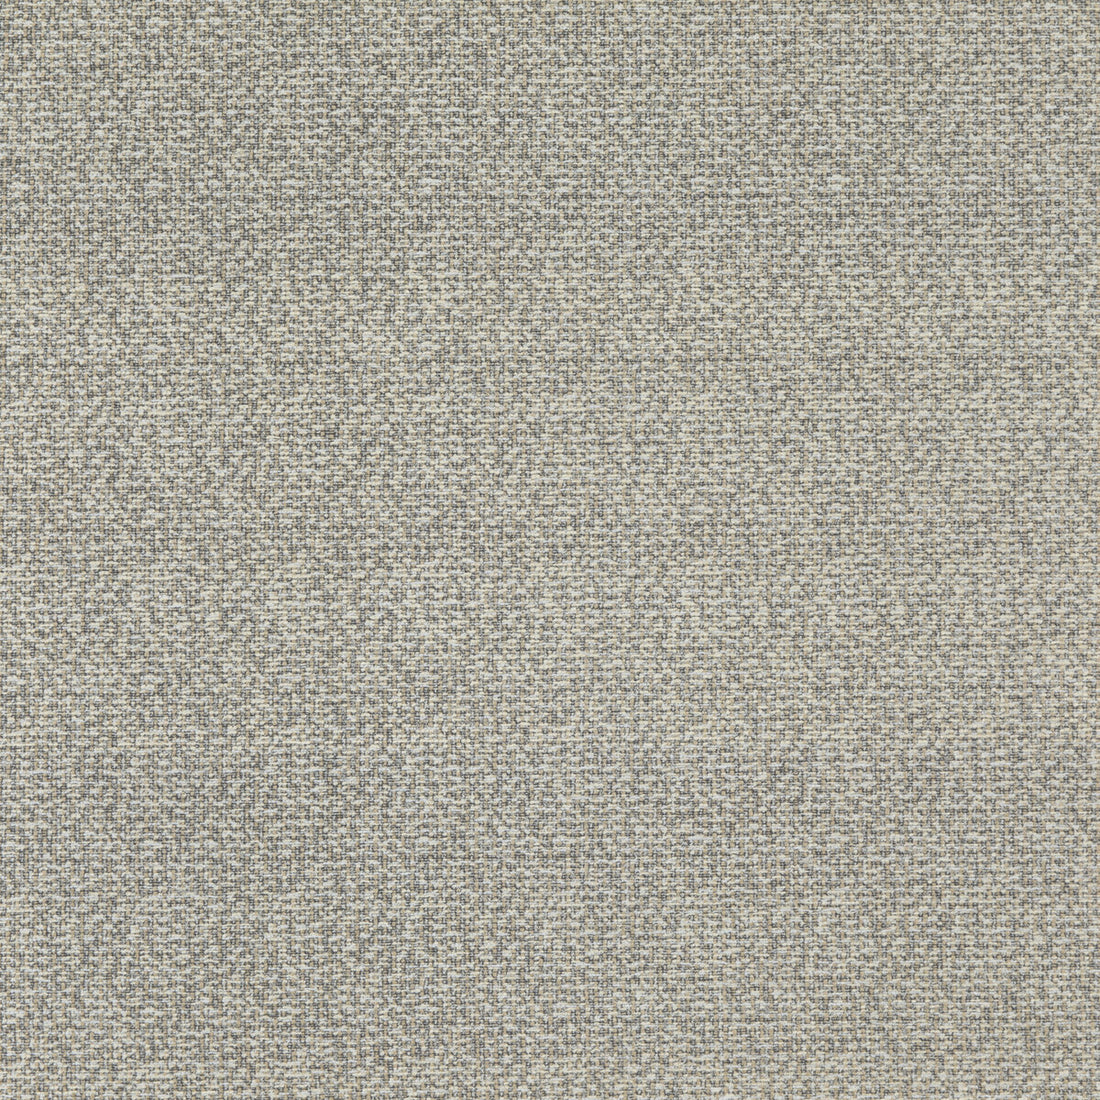 Cala fabric in pebble color - pattern ED85297.928.0 - by Threads in the Luxury Weaves collection